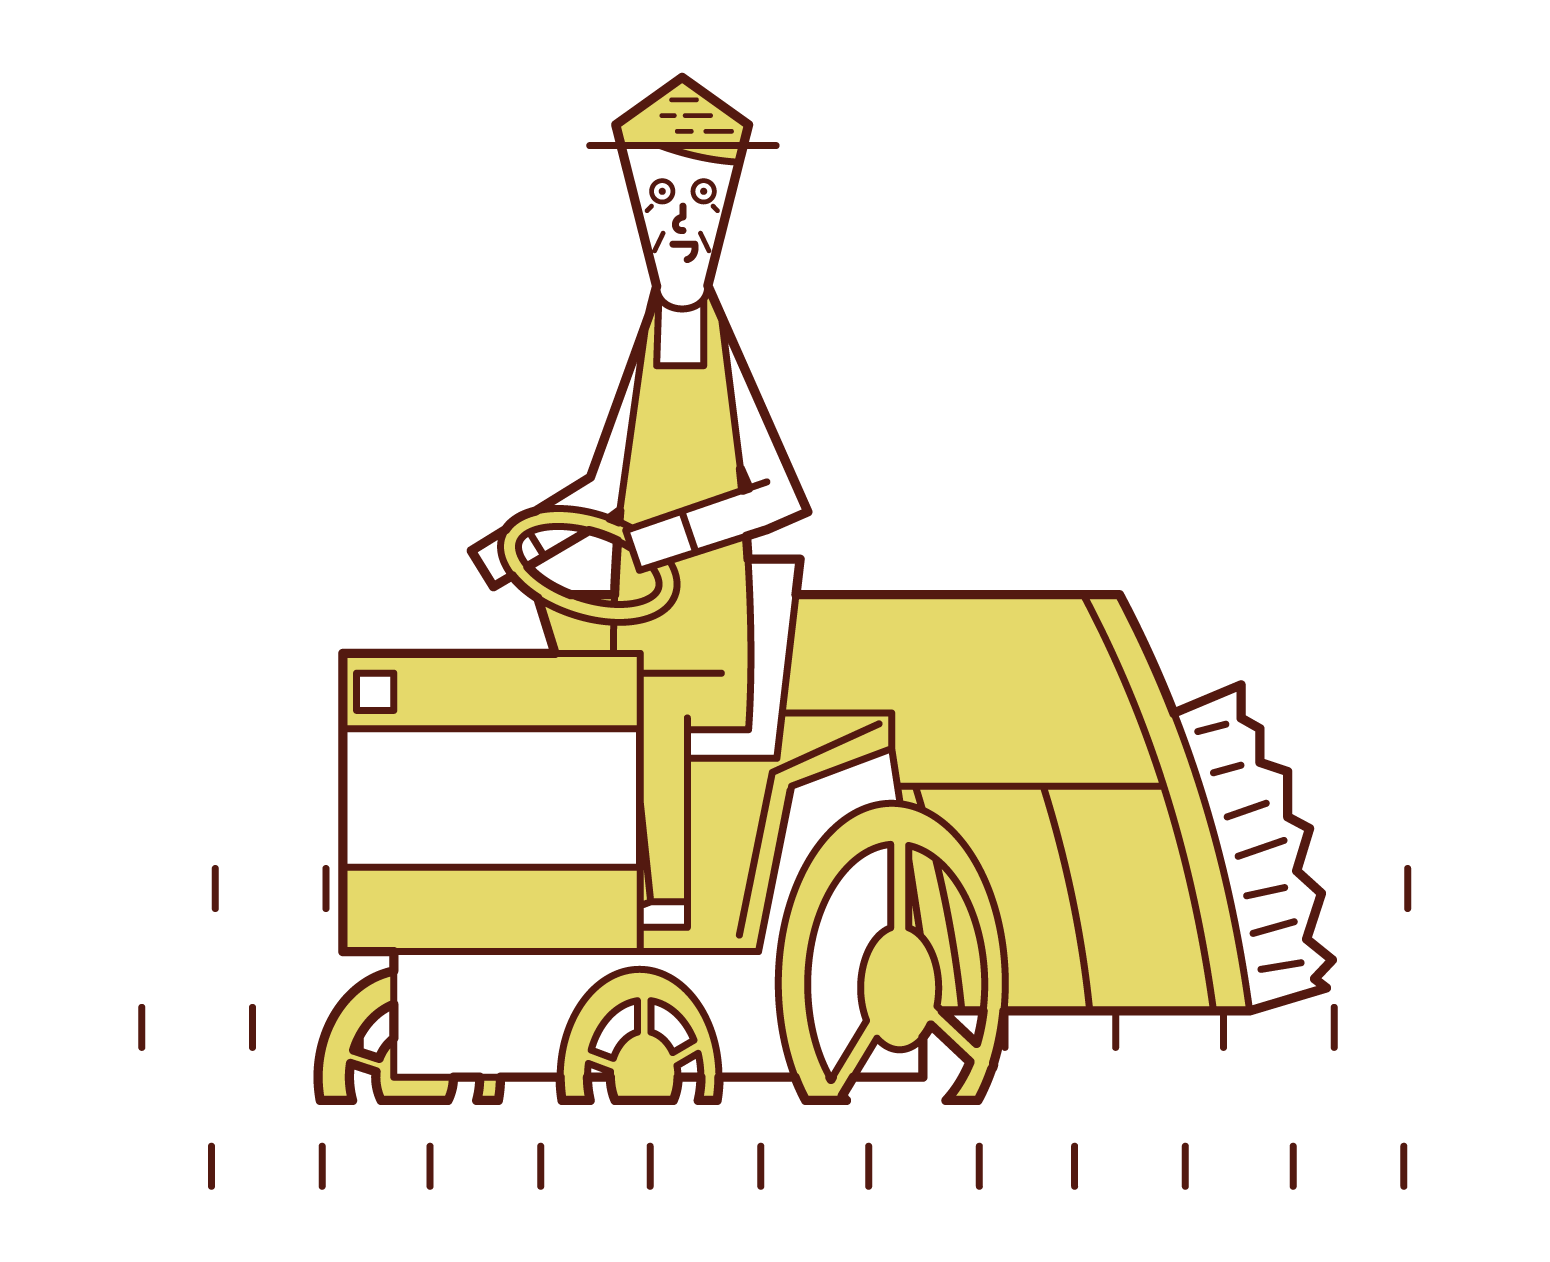 Illustration of a man (old man) driving a ride rice planting machine